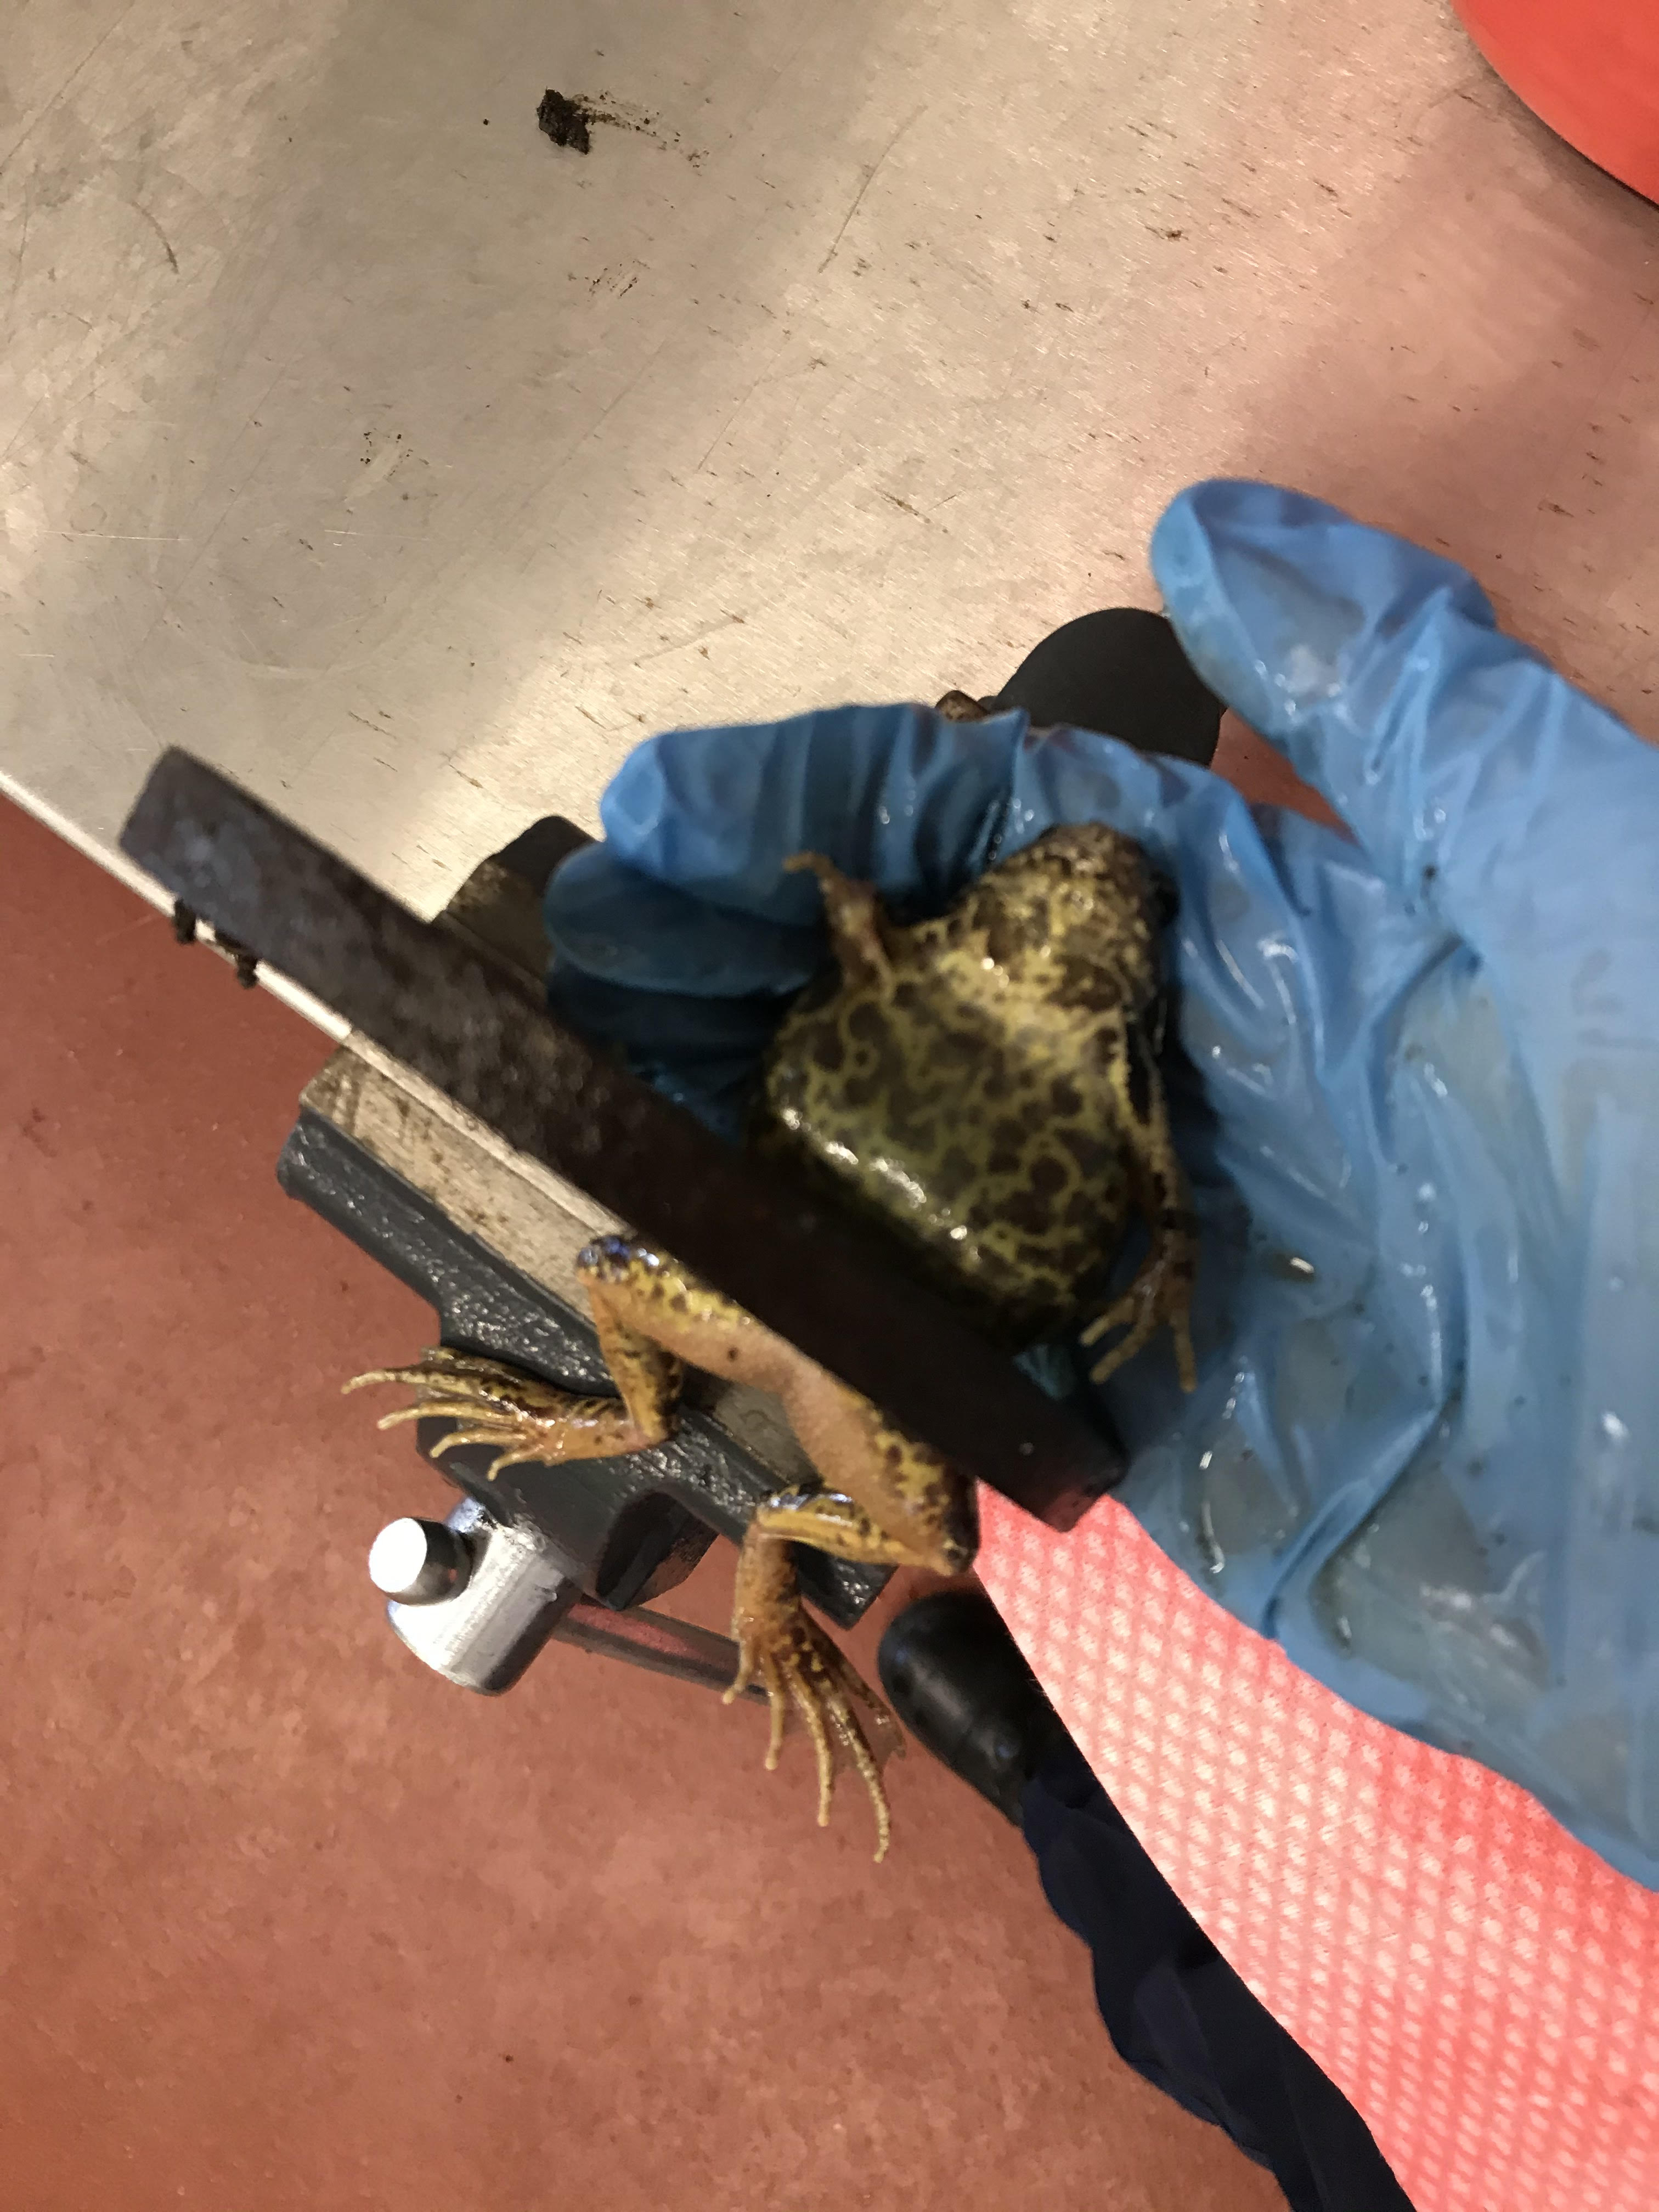 The frog was rescued when firefighters used an electric saw to cut it out (RSPCA/PA)